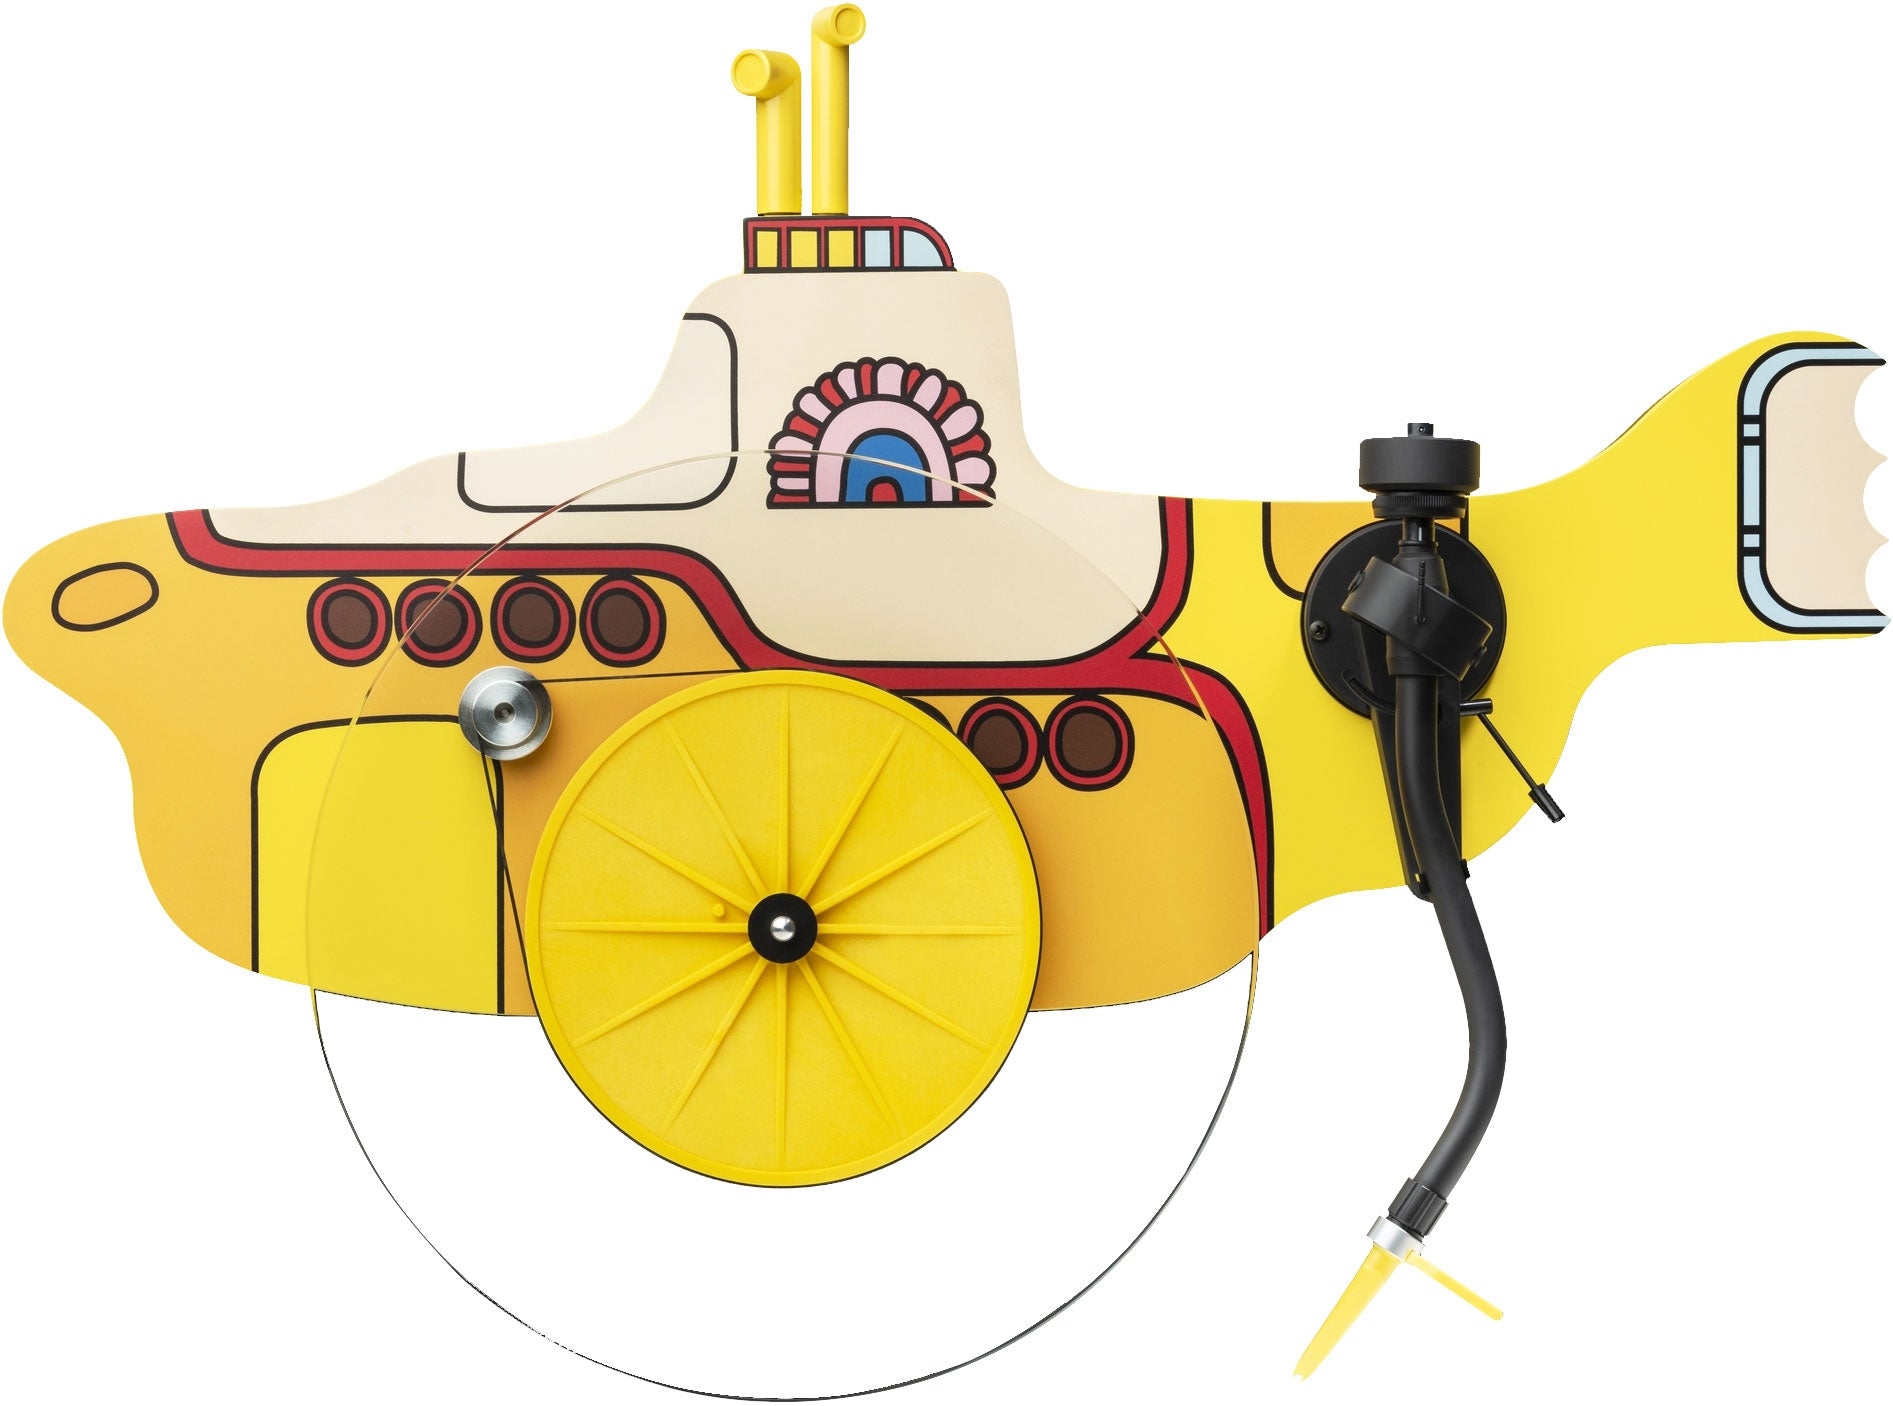 PRO-JECT THE YELLOW SUBMARINE - SPECIAL EDITION TURNTABLE WITH ORTOFON CONCORDE SONAR CARTRIDGE